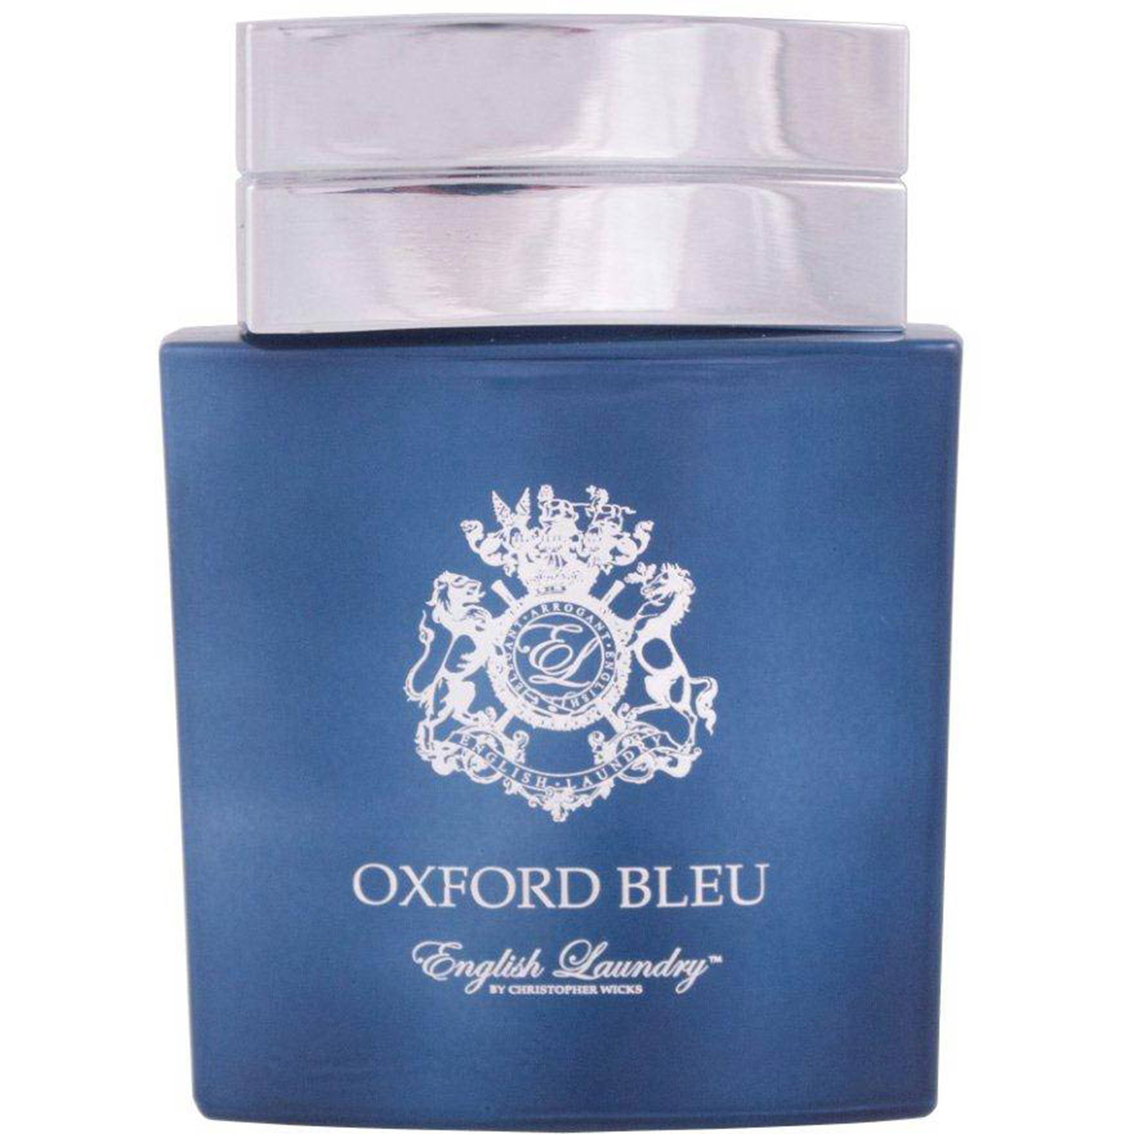 ENGLISH LAUNDRY OXFORD BLEU by English Laundry EAU DE PARFUM SPRAY 3.4 OZ  for WOMEN And a Mystery Name brand sample vile